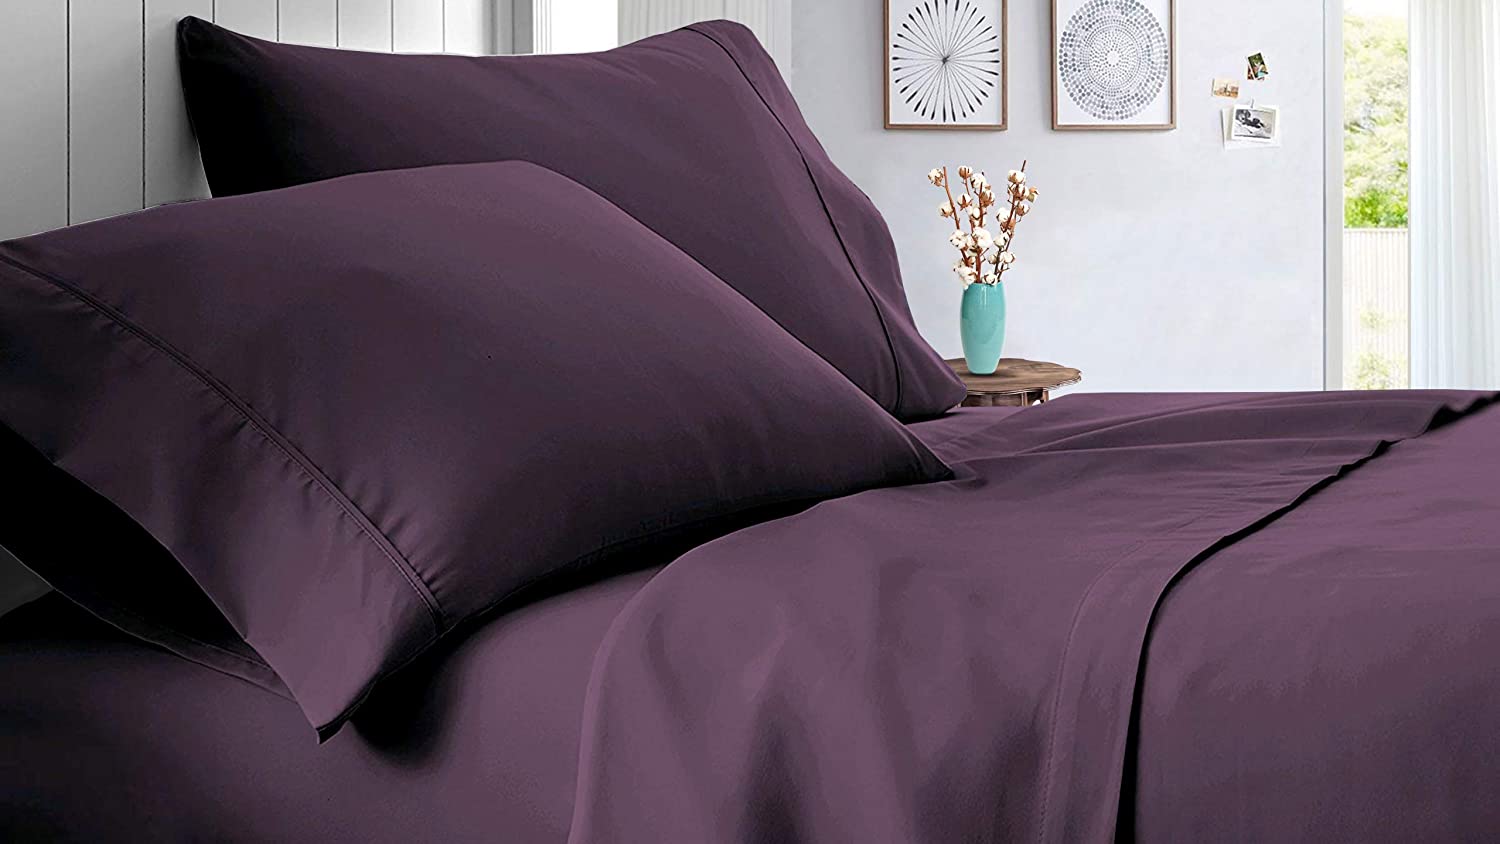 800 Thread Count 100% Egyptain Cotton Sheet King Lilac Sheets Set, 4-Piece